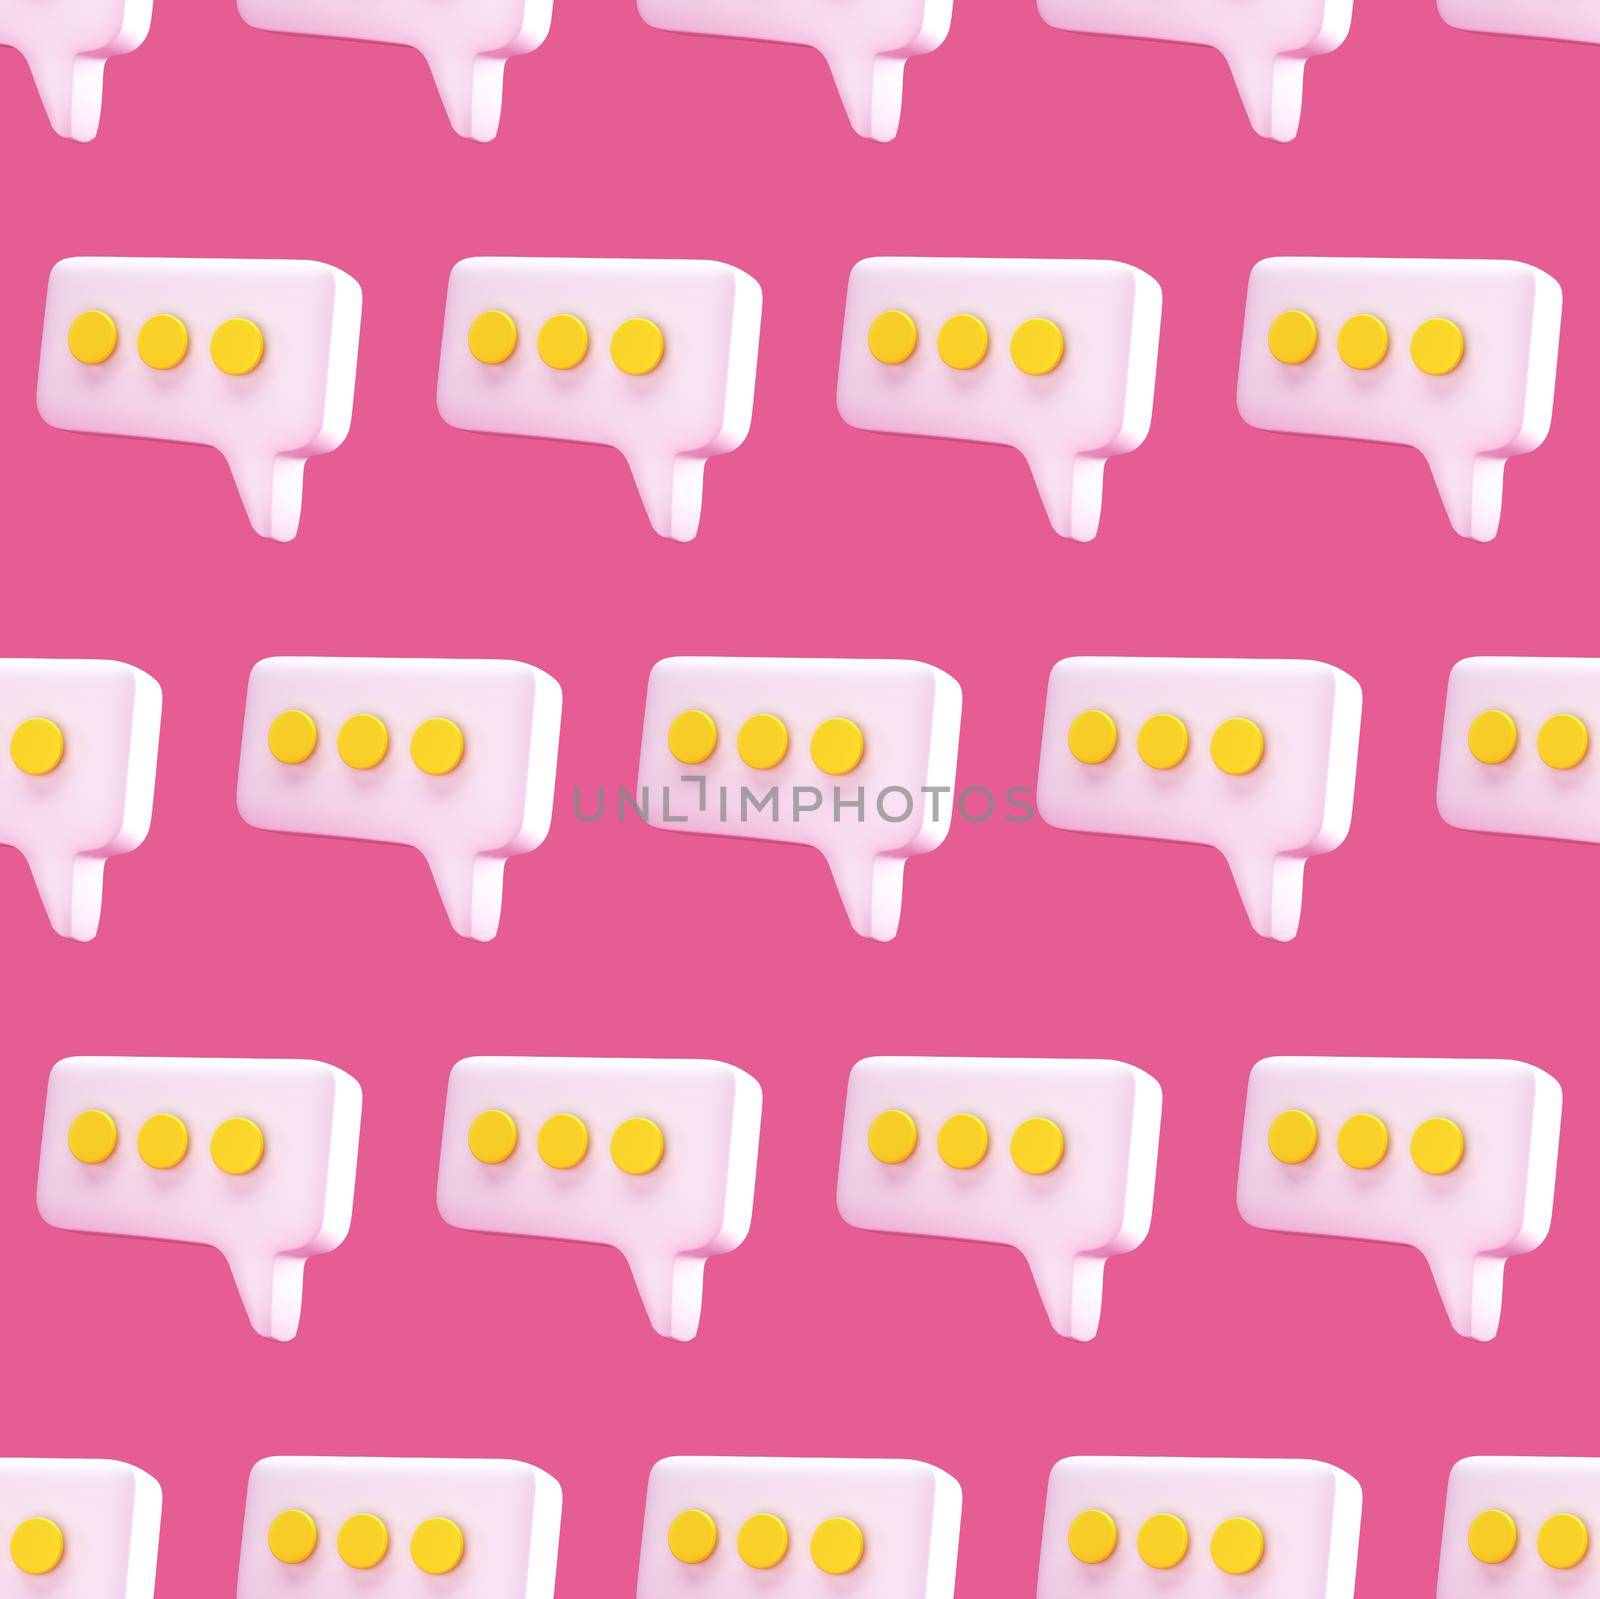 Speech bubble chat icon seamless pattern on pink background. Message creative concept with copy space for text. Communication or comment chat symbol. Minimalism concept. 3d illustration 3D render